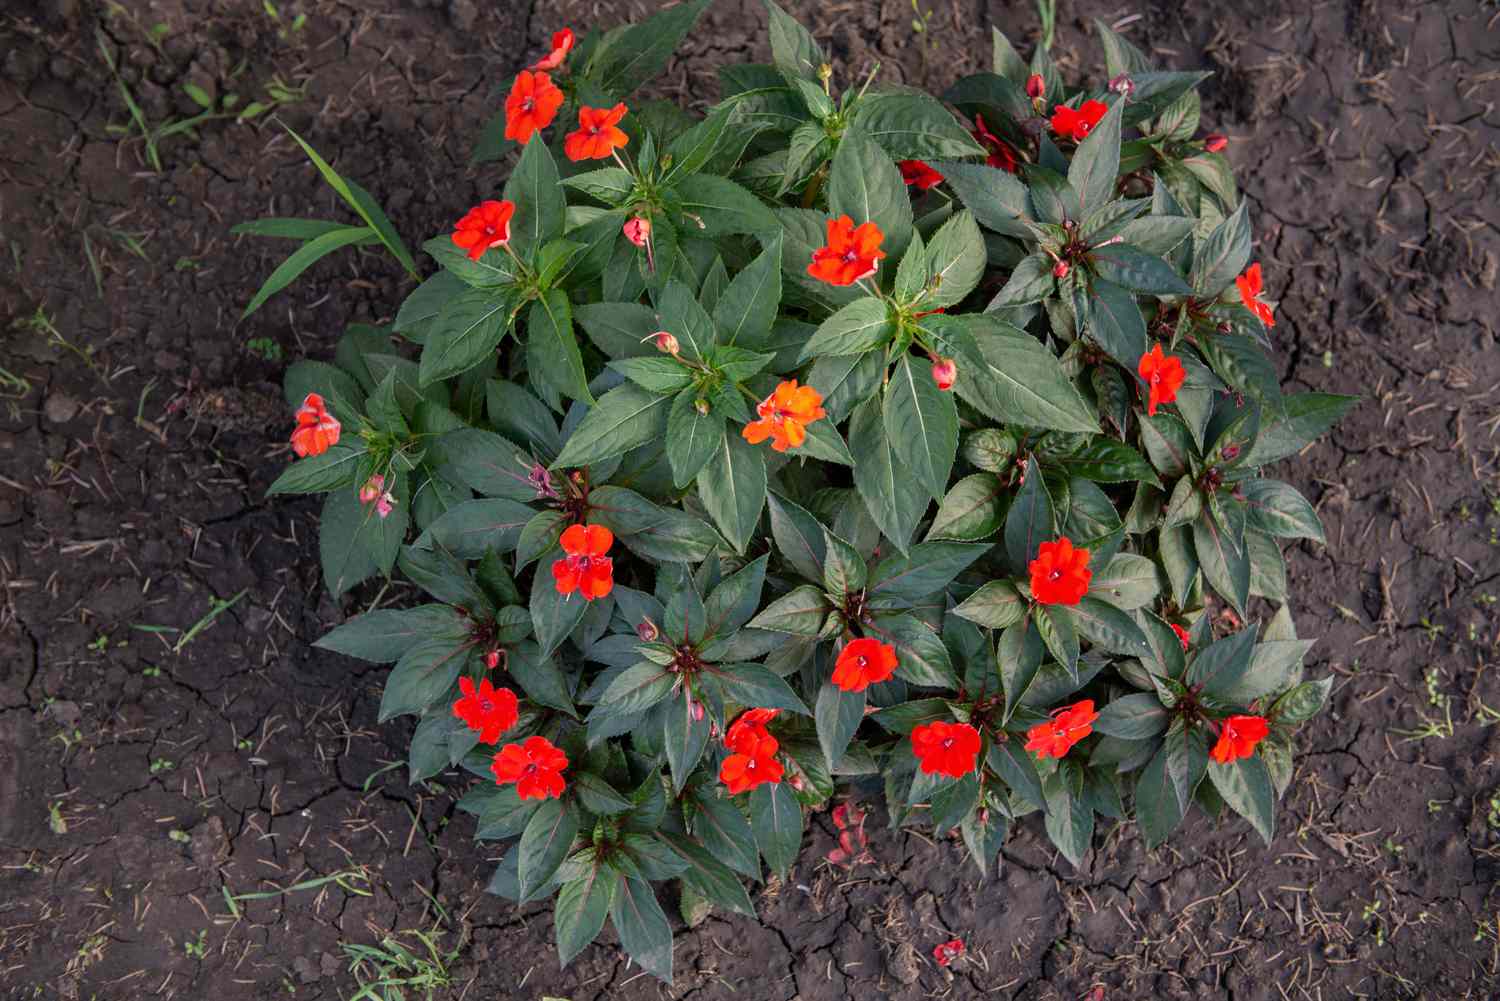 SunPatiens bush from above with bright red and orange flowers surrounded by clustered leaves